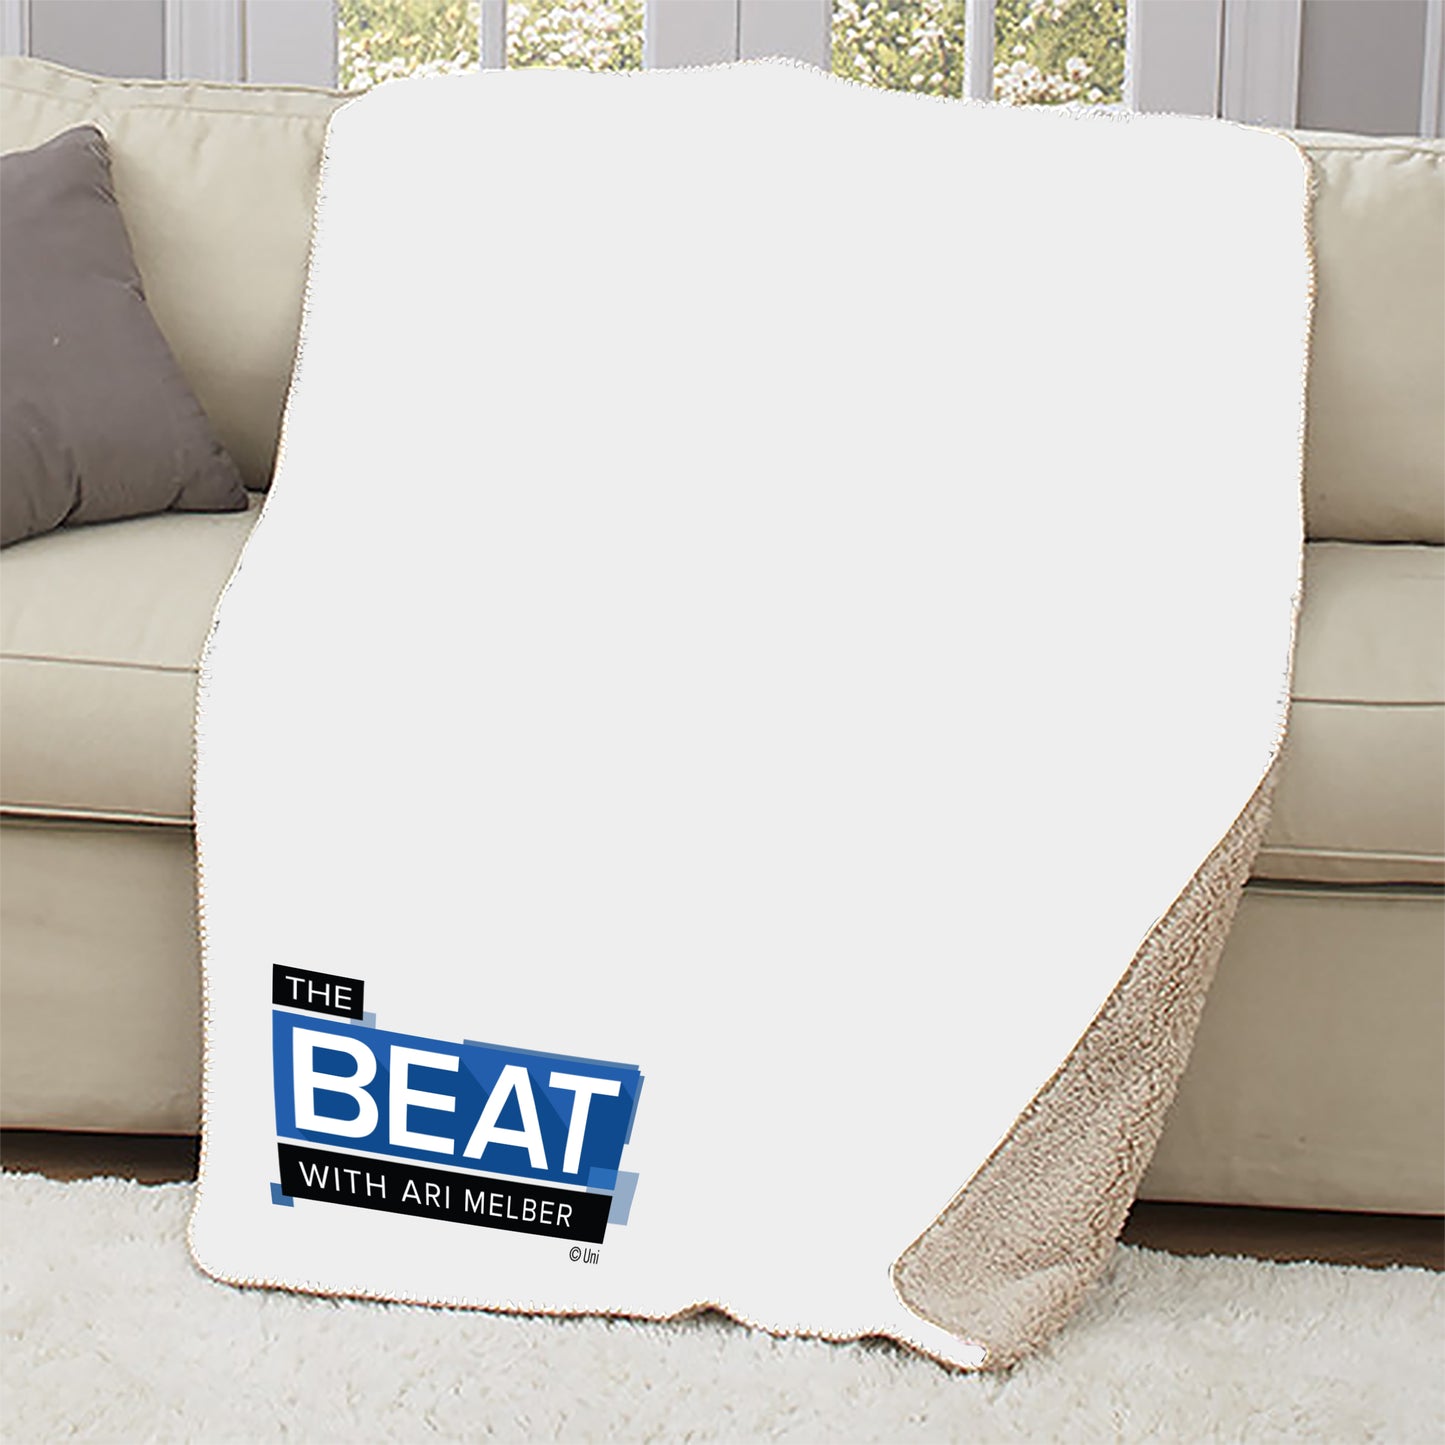 The Beat with Ari Melber Sherpa Blanket